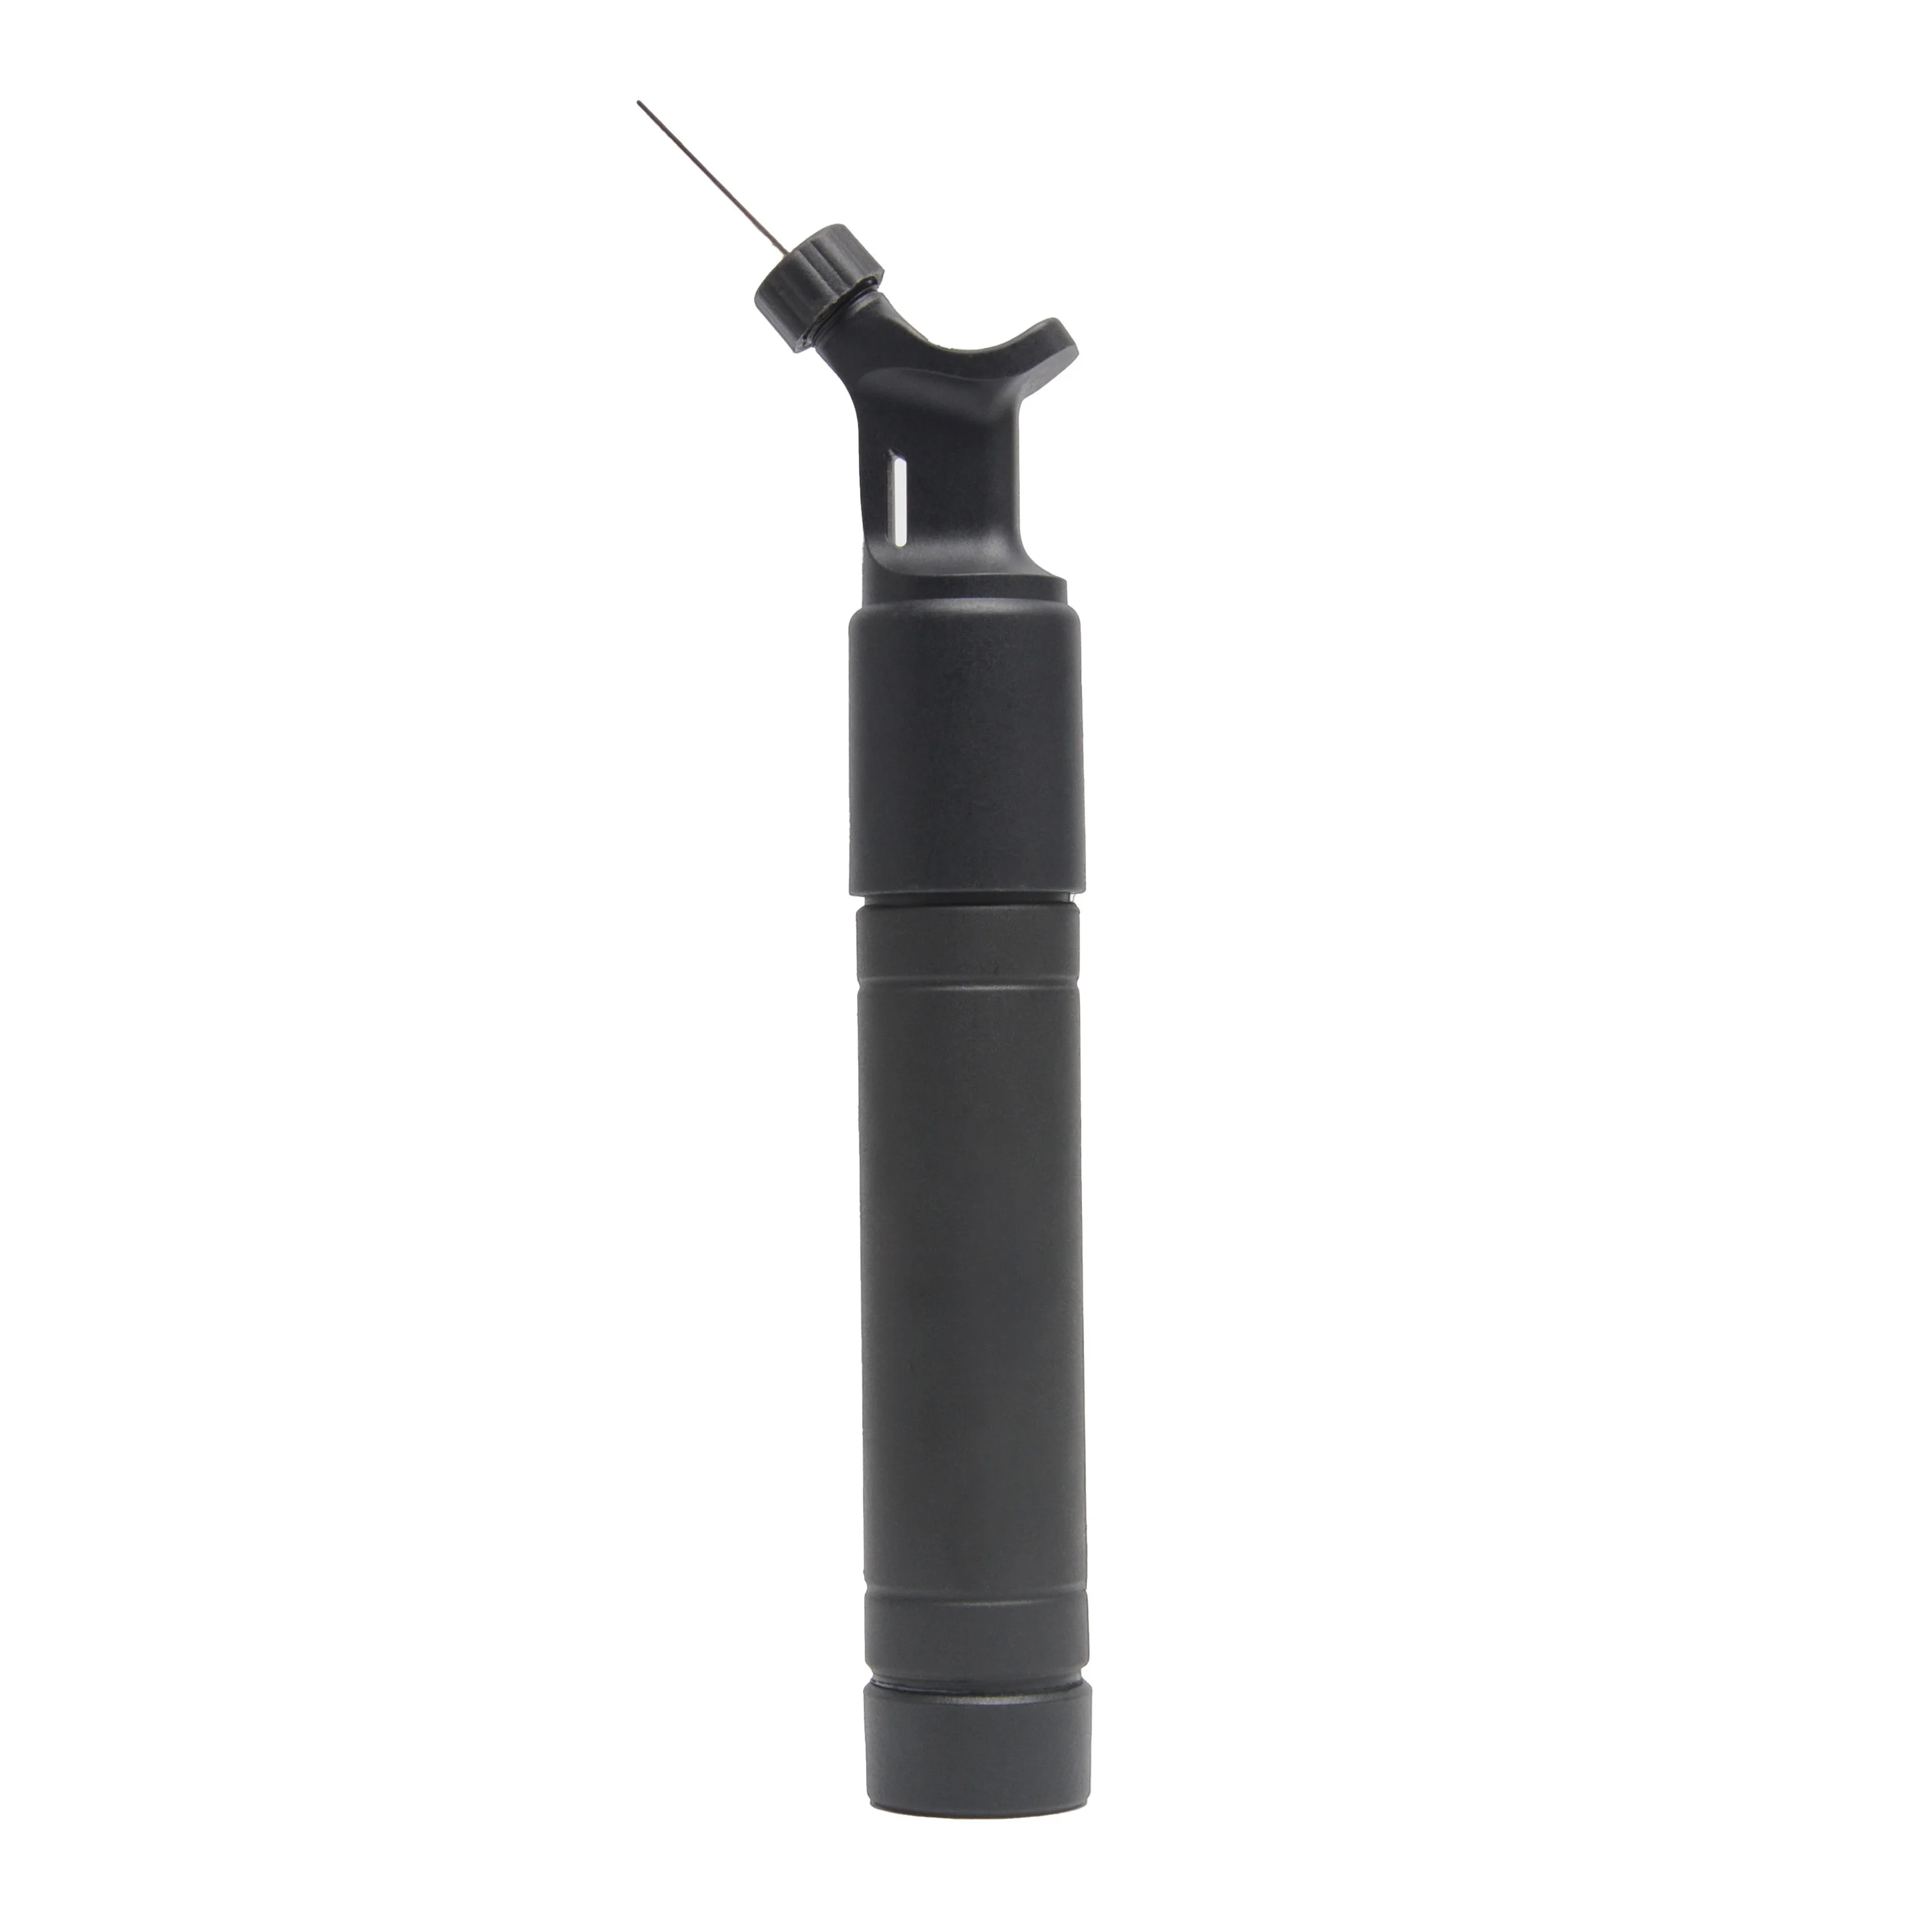 

Good Quality Ball Pump With Needles Push & Pull Inflating System Hand Held Portable Air Pump With Pins For Daily Mini Hand Pump